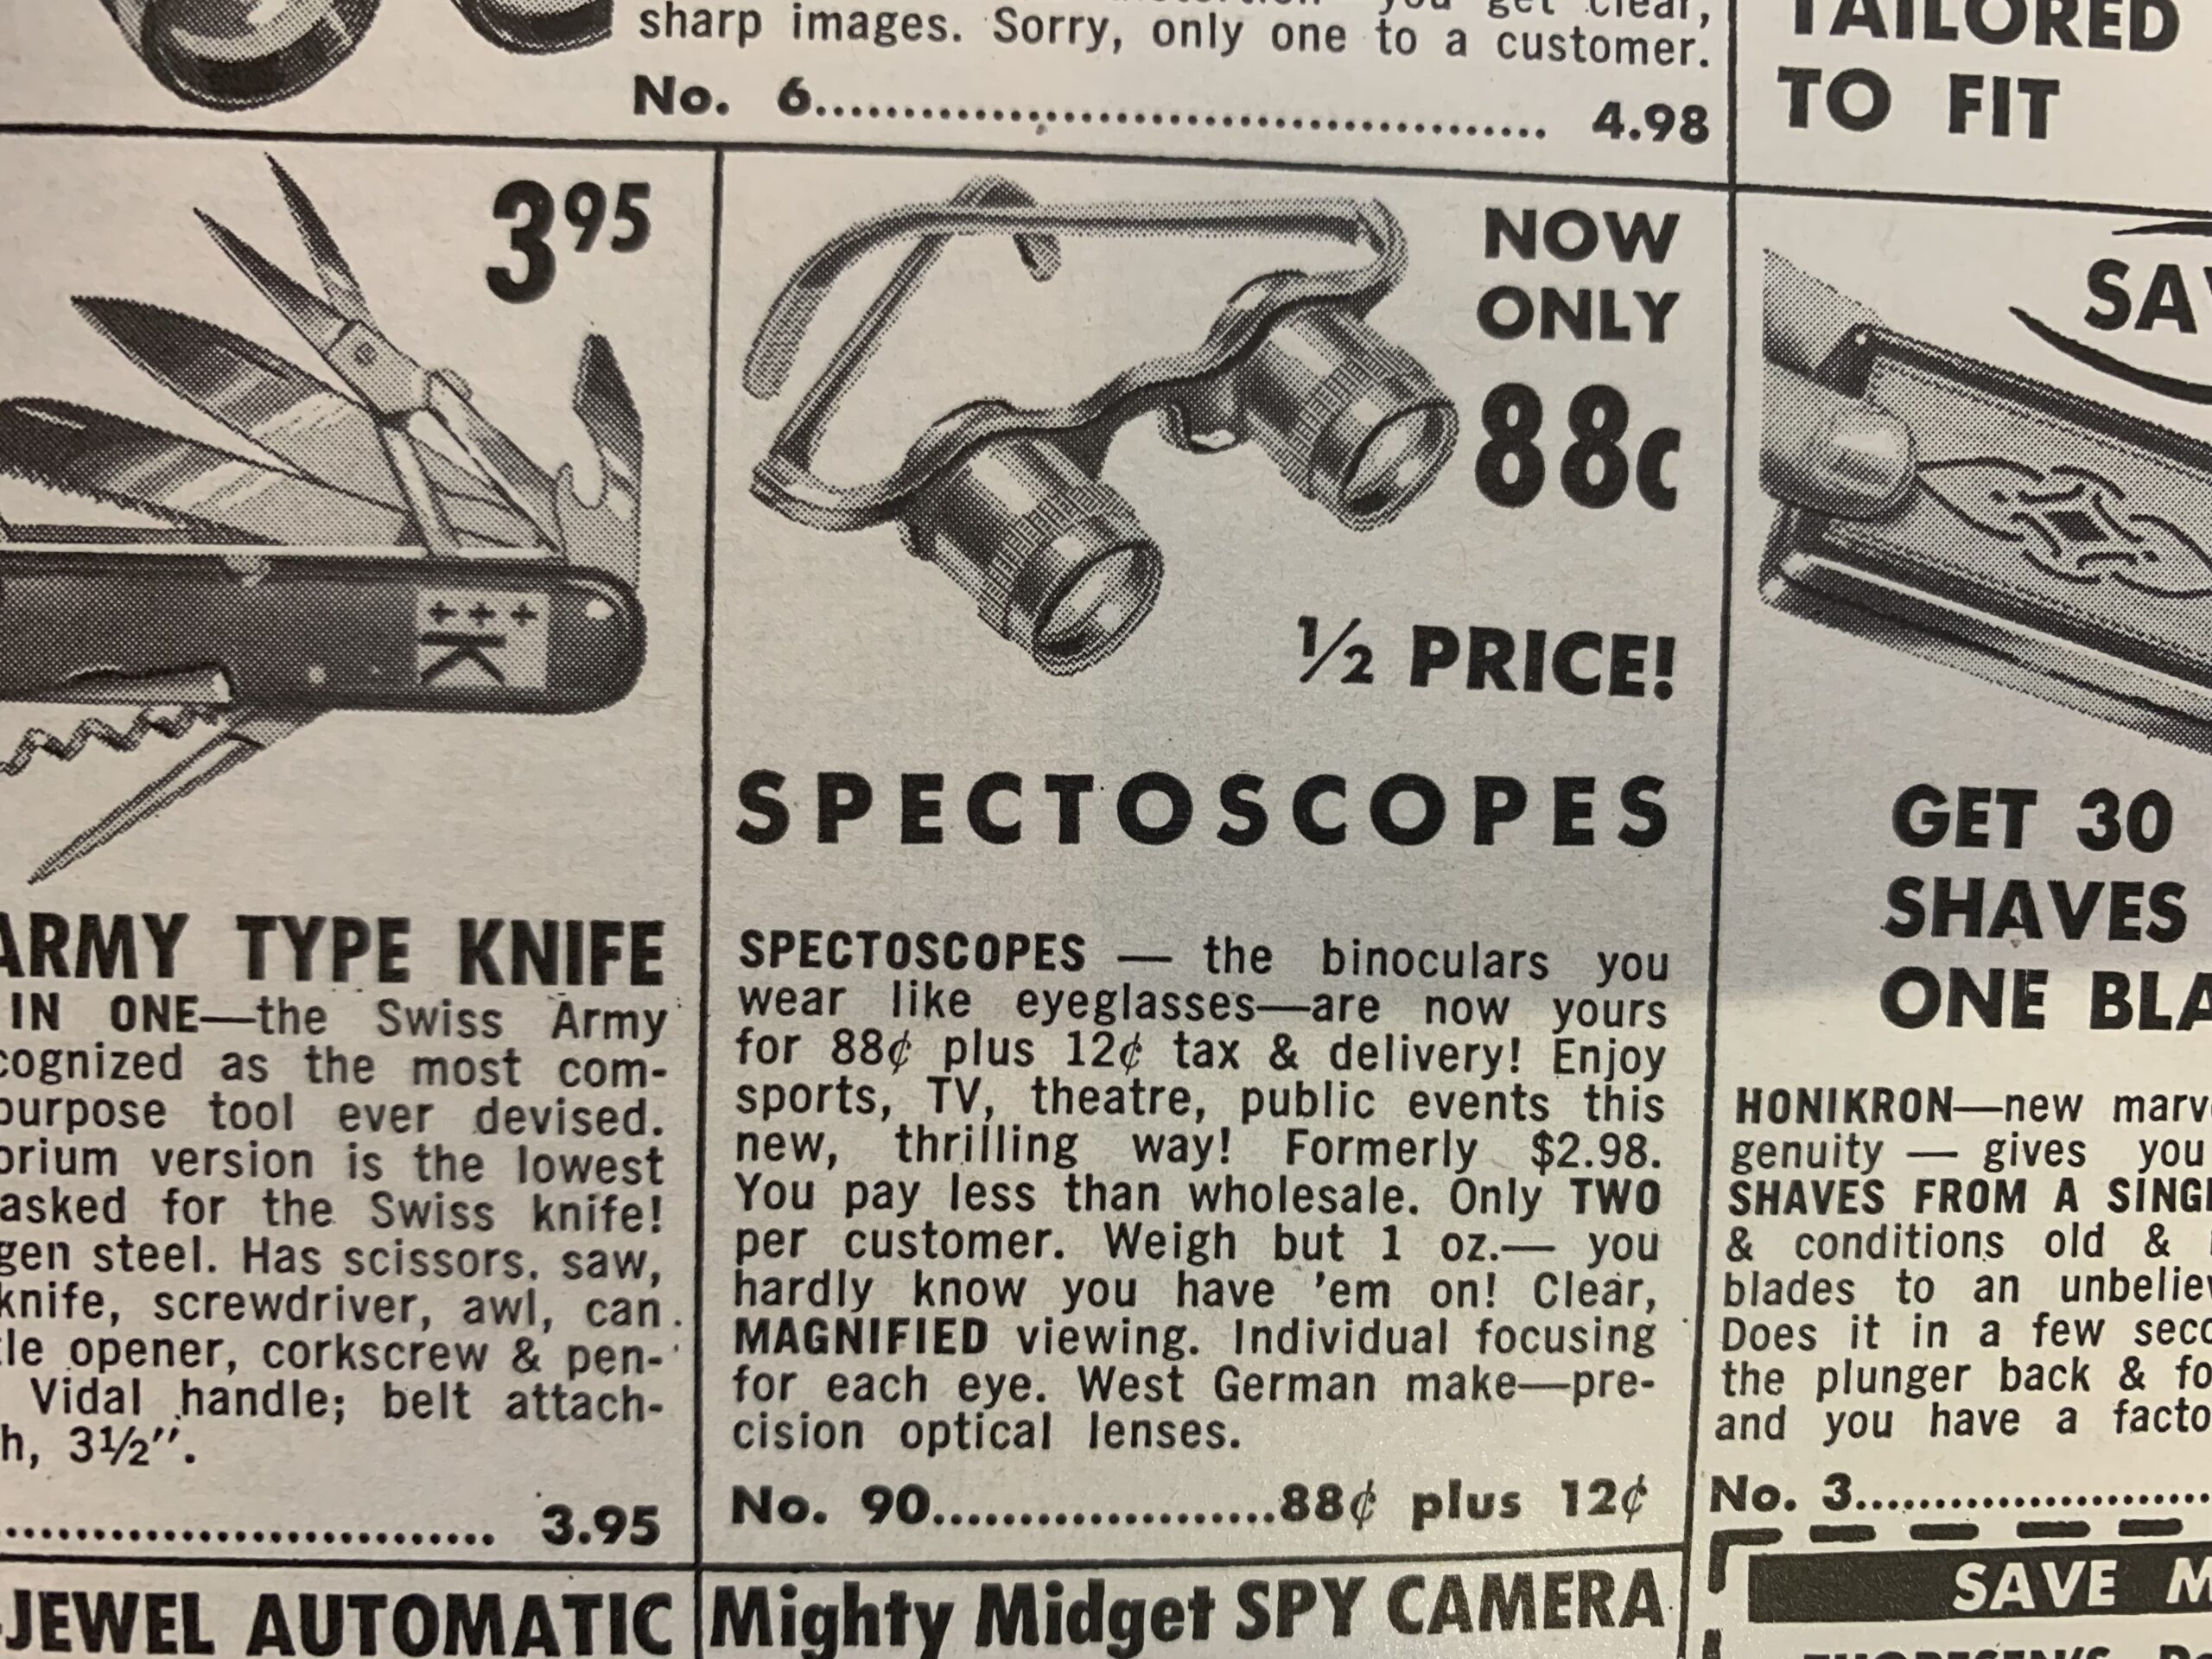 Spectoscopes in Outdoor Life ad